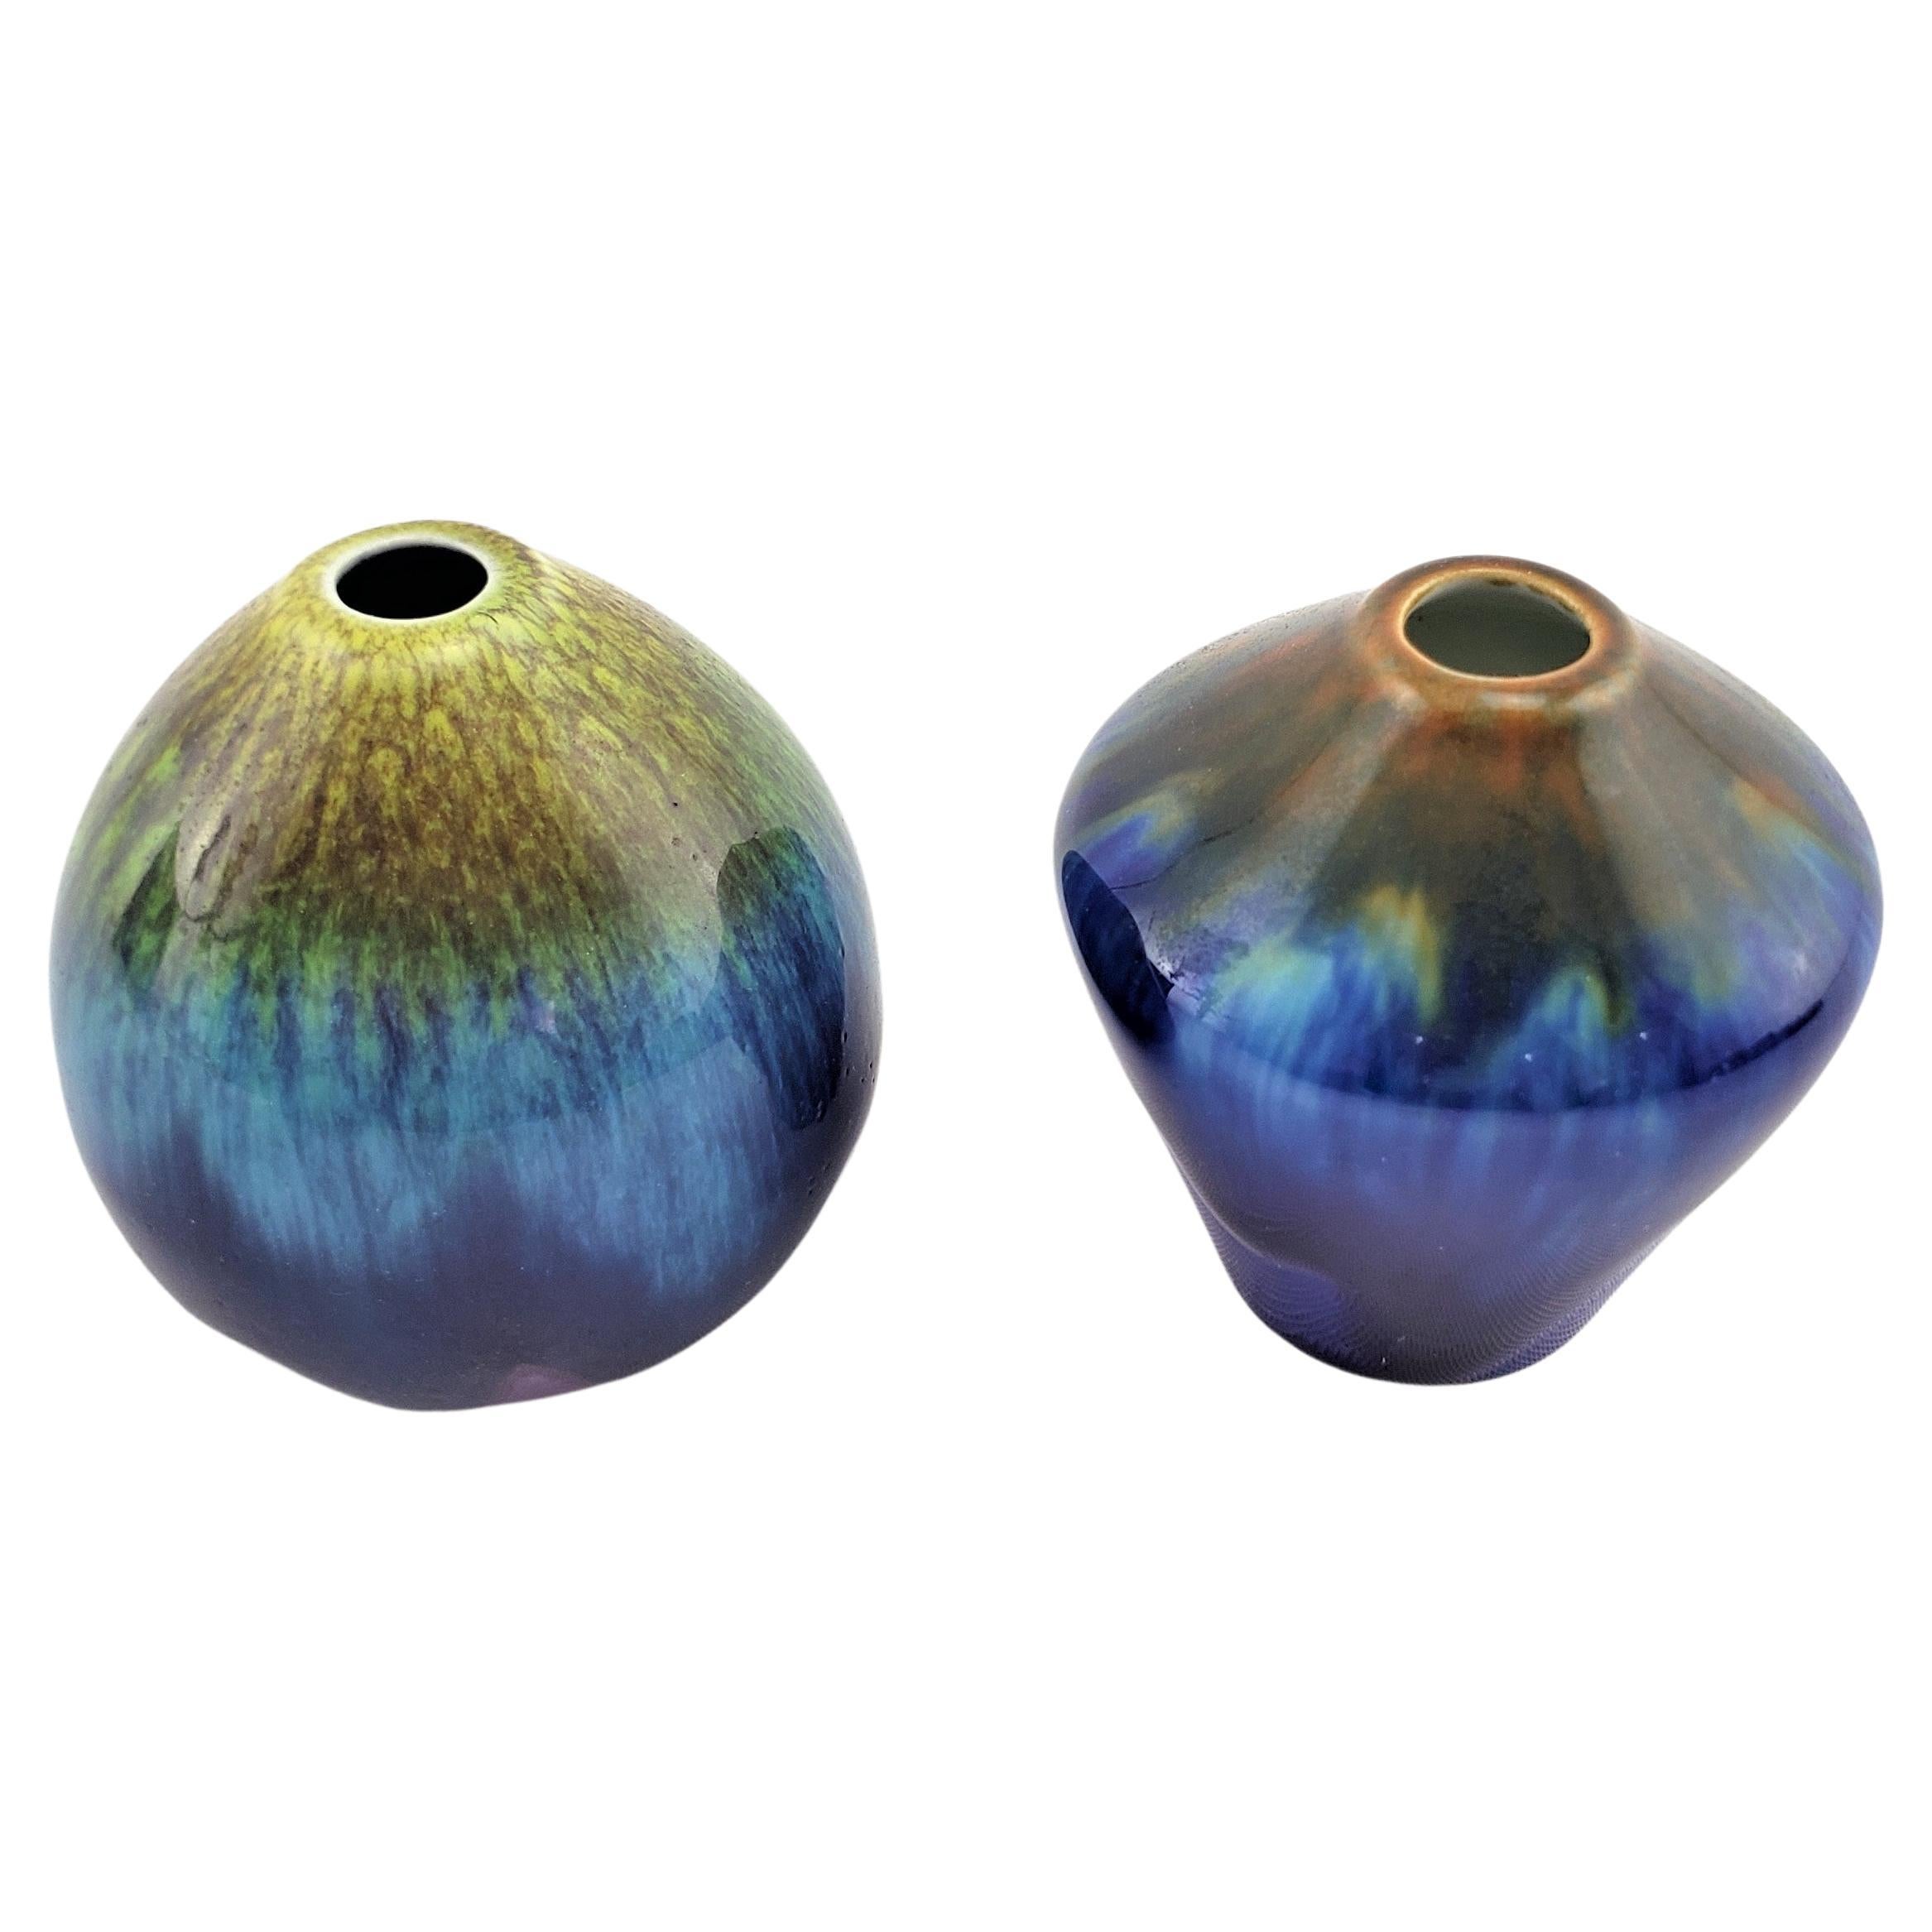 This pair of miniature art pottery vases are unsigned, but being attributed to Berndt Friberg for Gustavsberg of Sweden and date to approximately 1965 and done in the period Mid-Century Modern style. The vases are both two and one have inches in